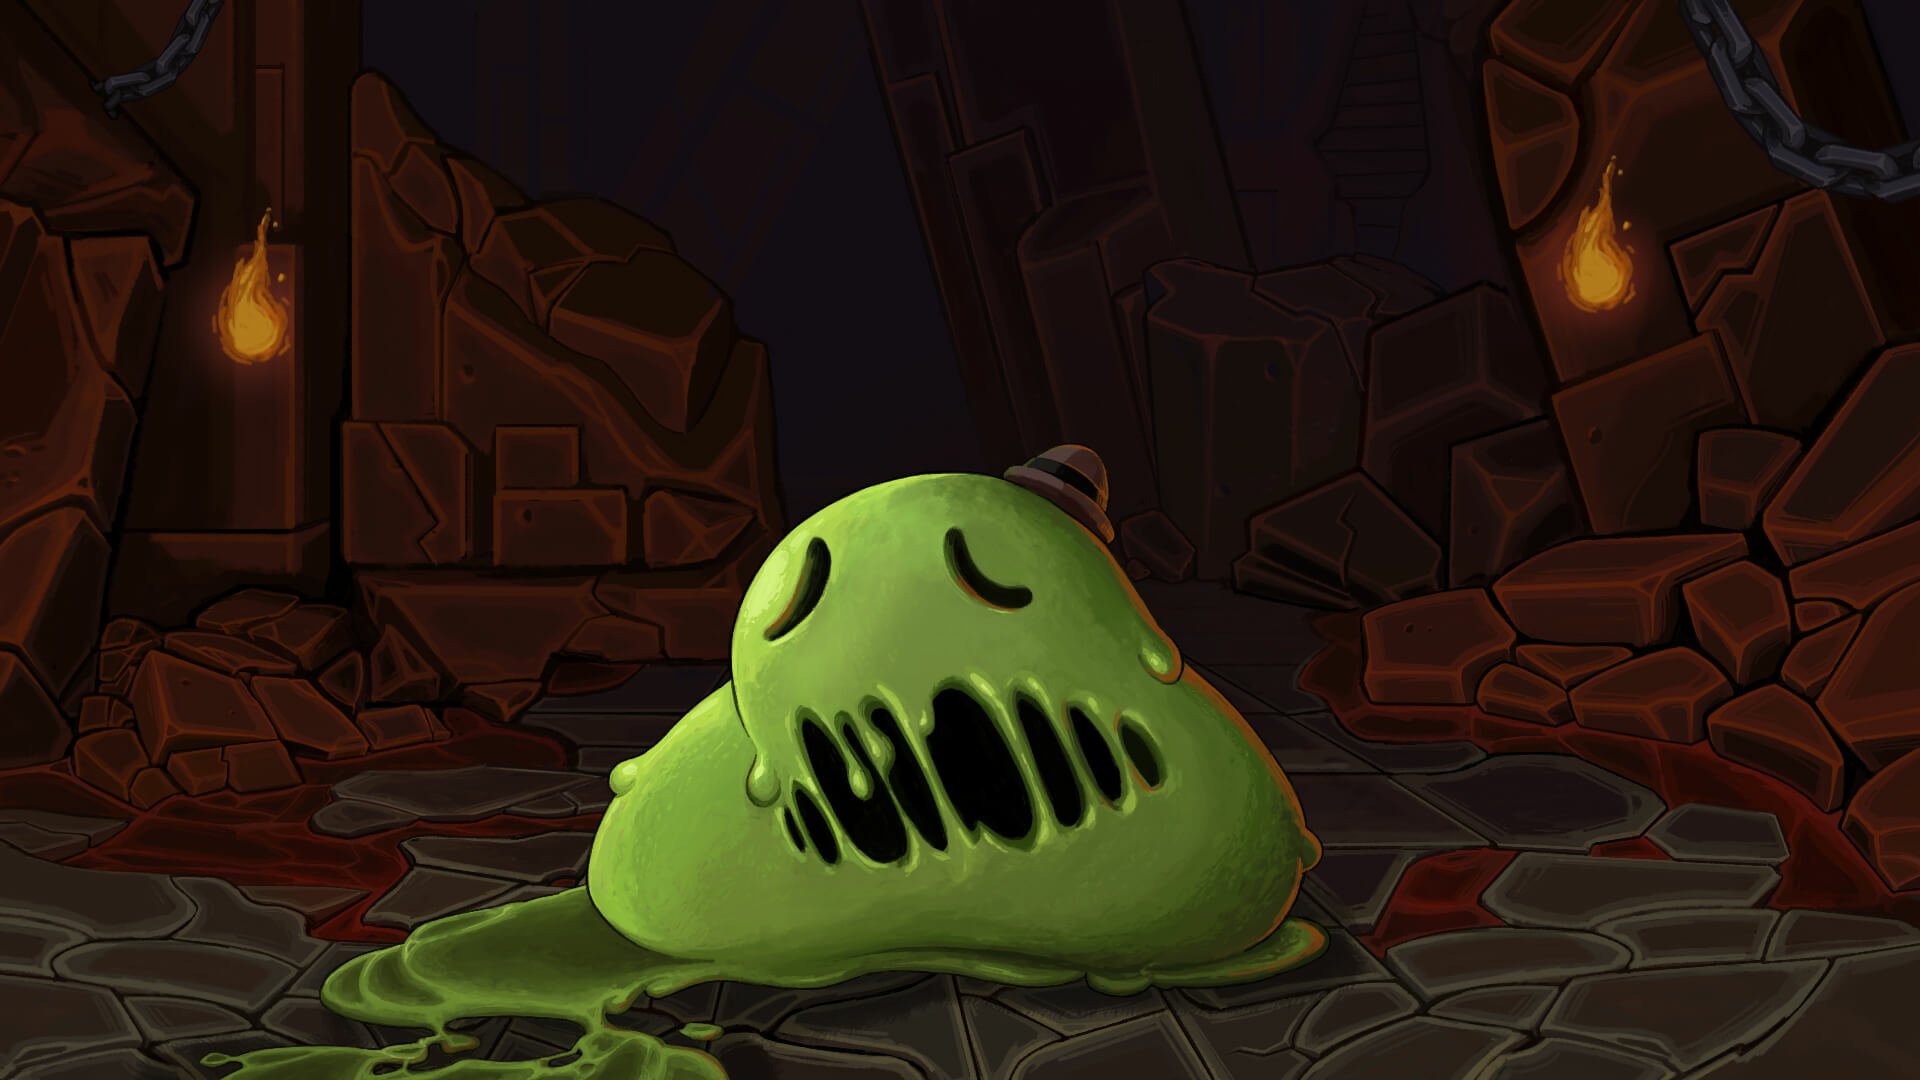 Slay the Spire HD wallpaper featuring Acid Slime enemy in a dungeon setting.